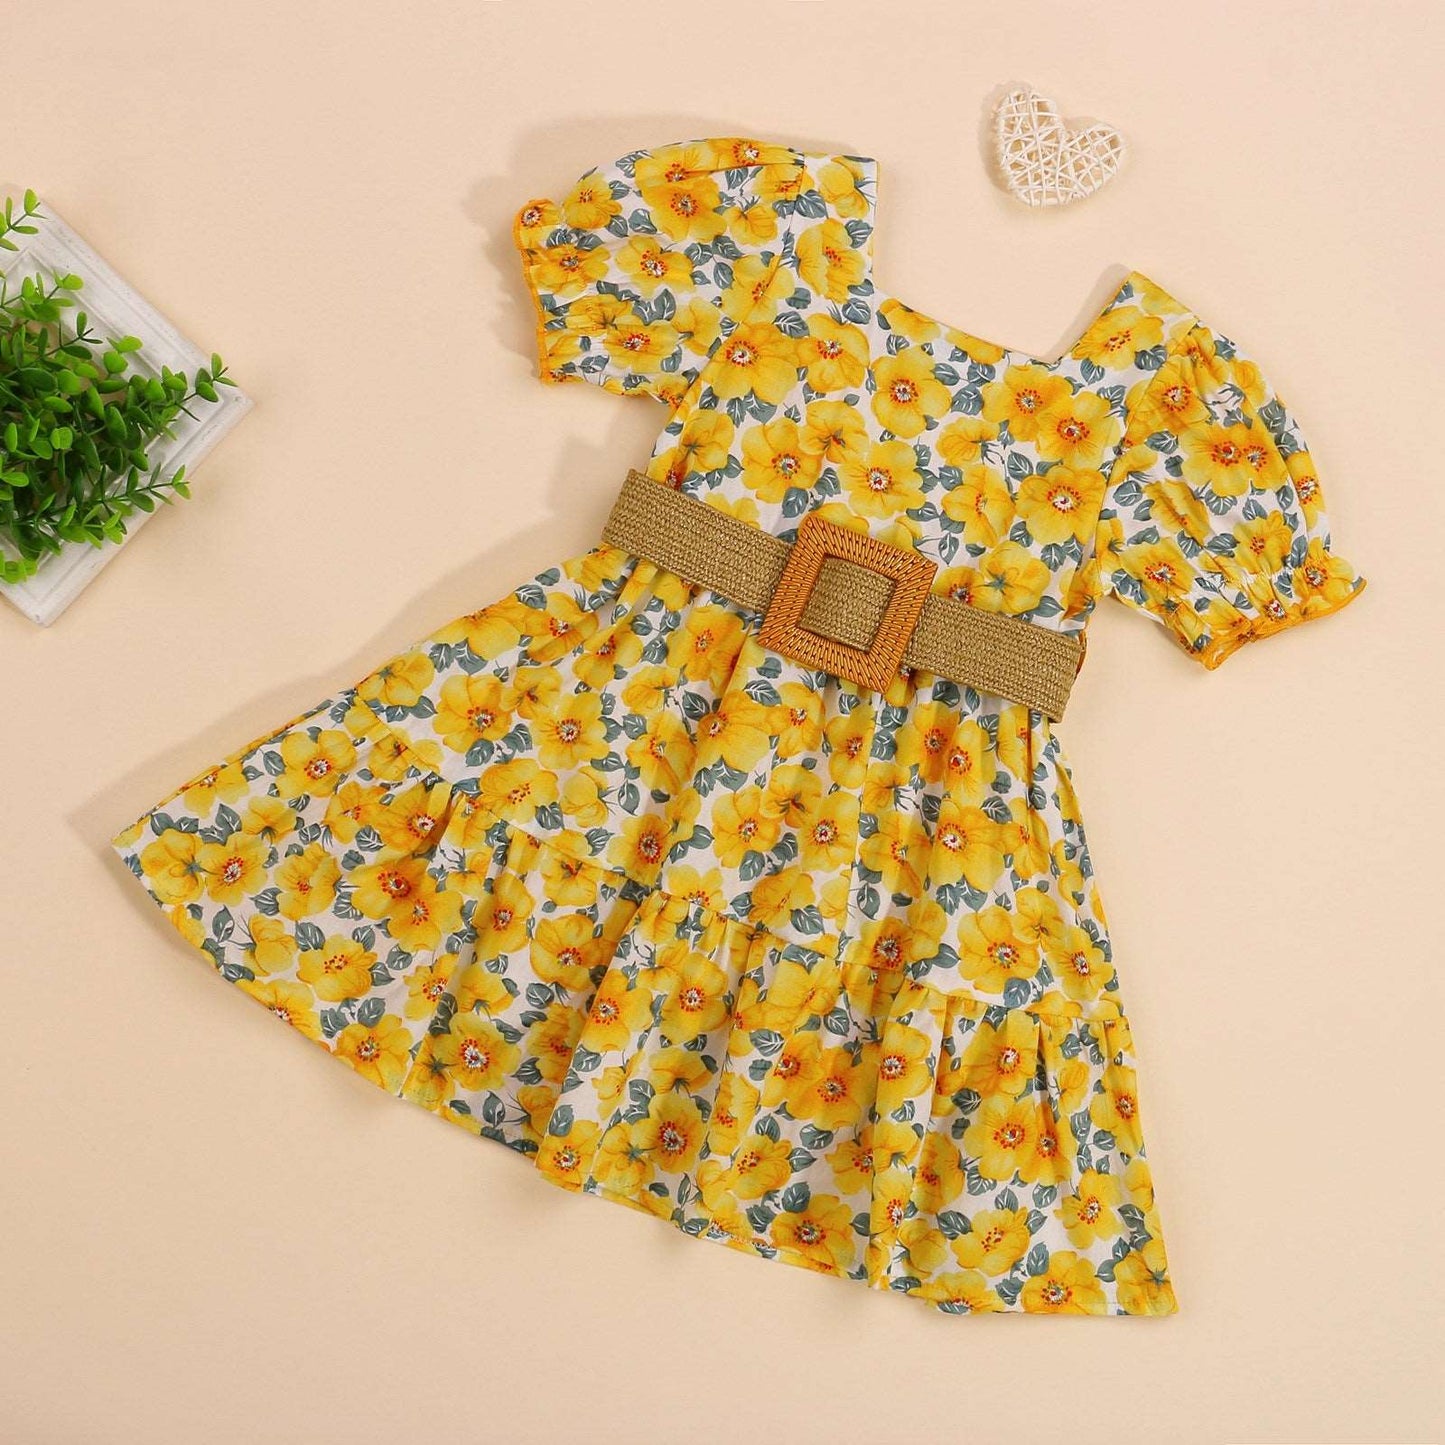 Baby Floral Dress Girl Clothing For Infant